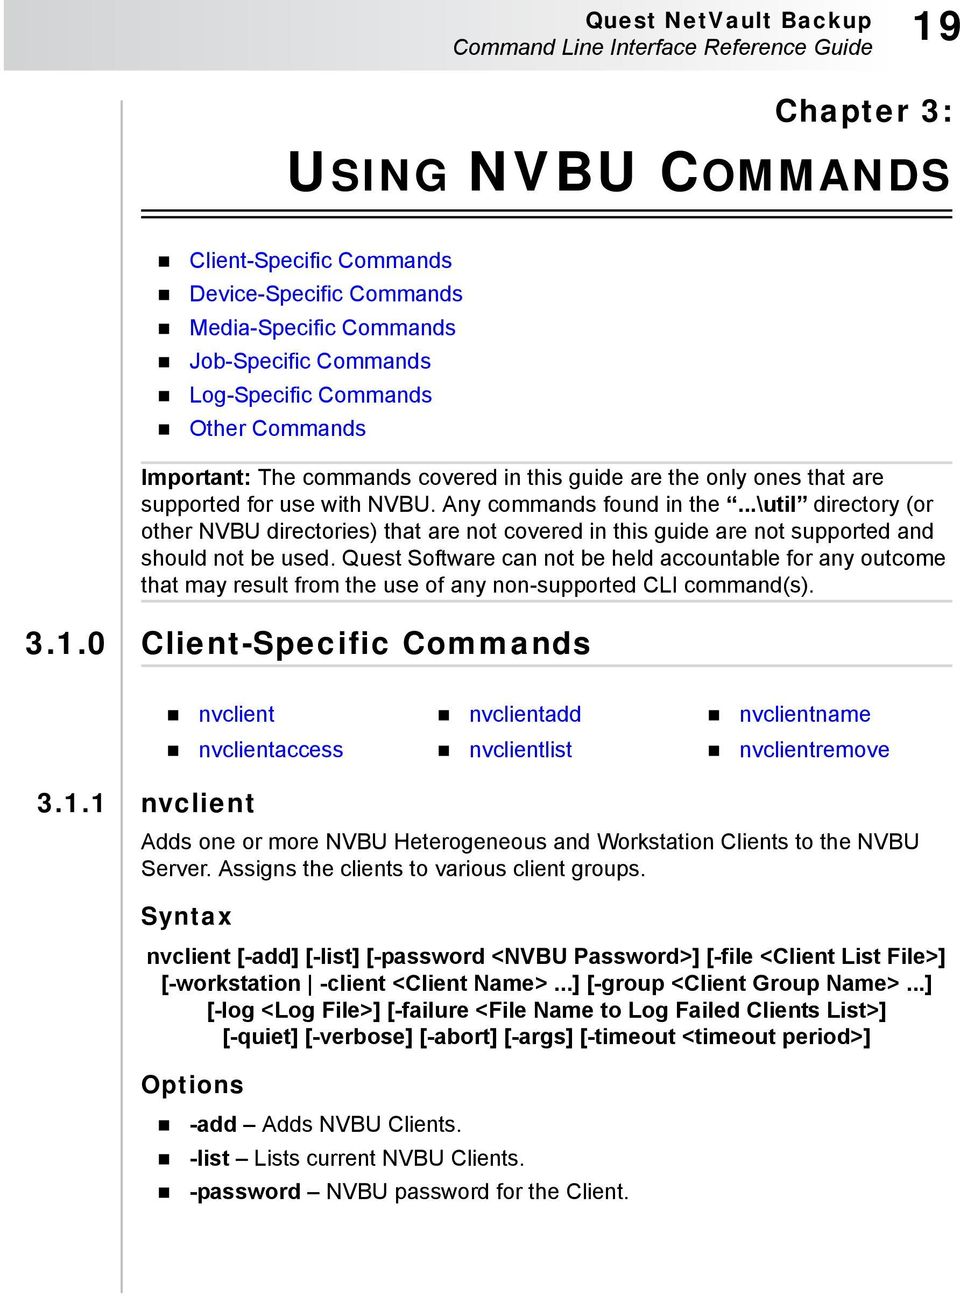 ..\util directory (or other NVBU directories) that are not covered in this guide are not supported and should not be used.